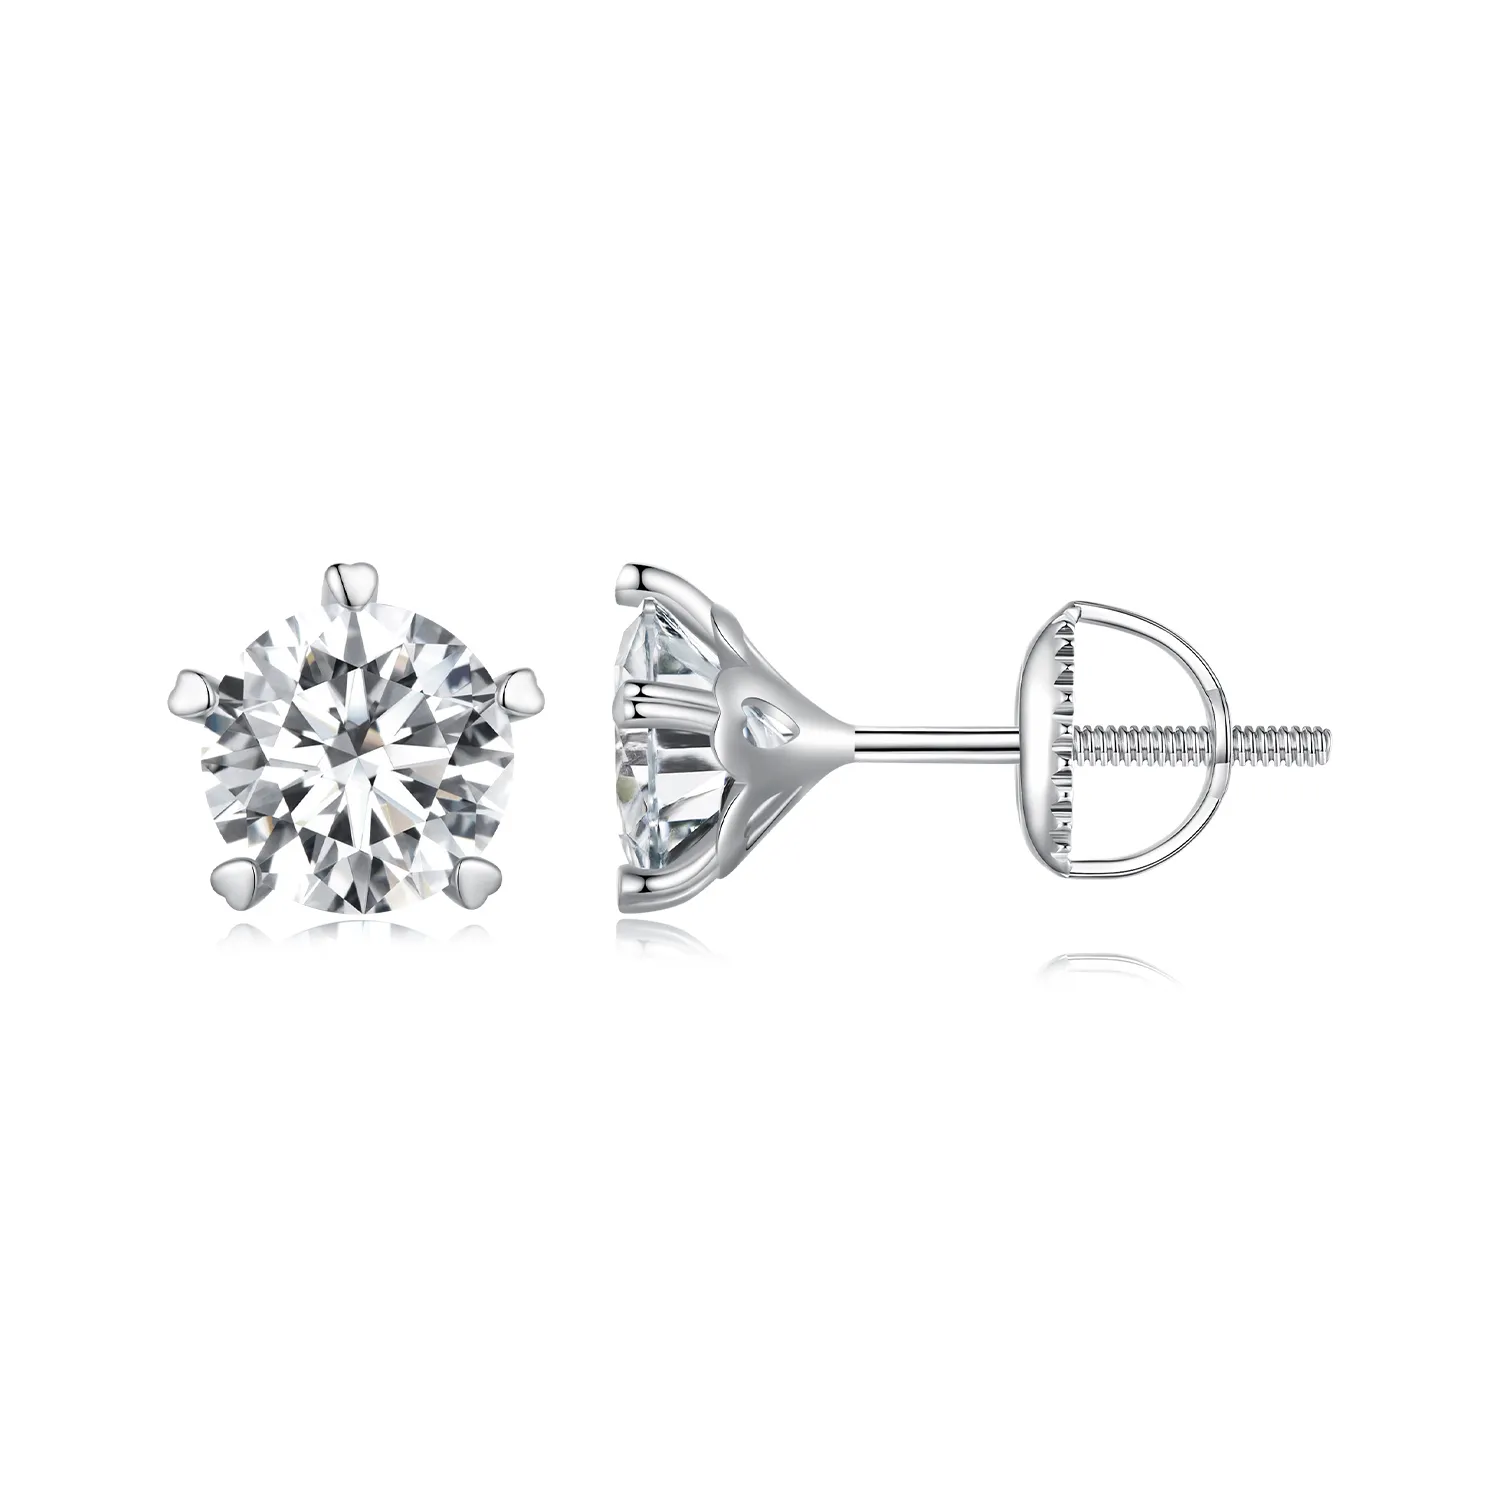 Pandora Style 1Ct Moissanite Studs Earrings - MSE024-L